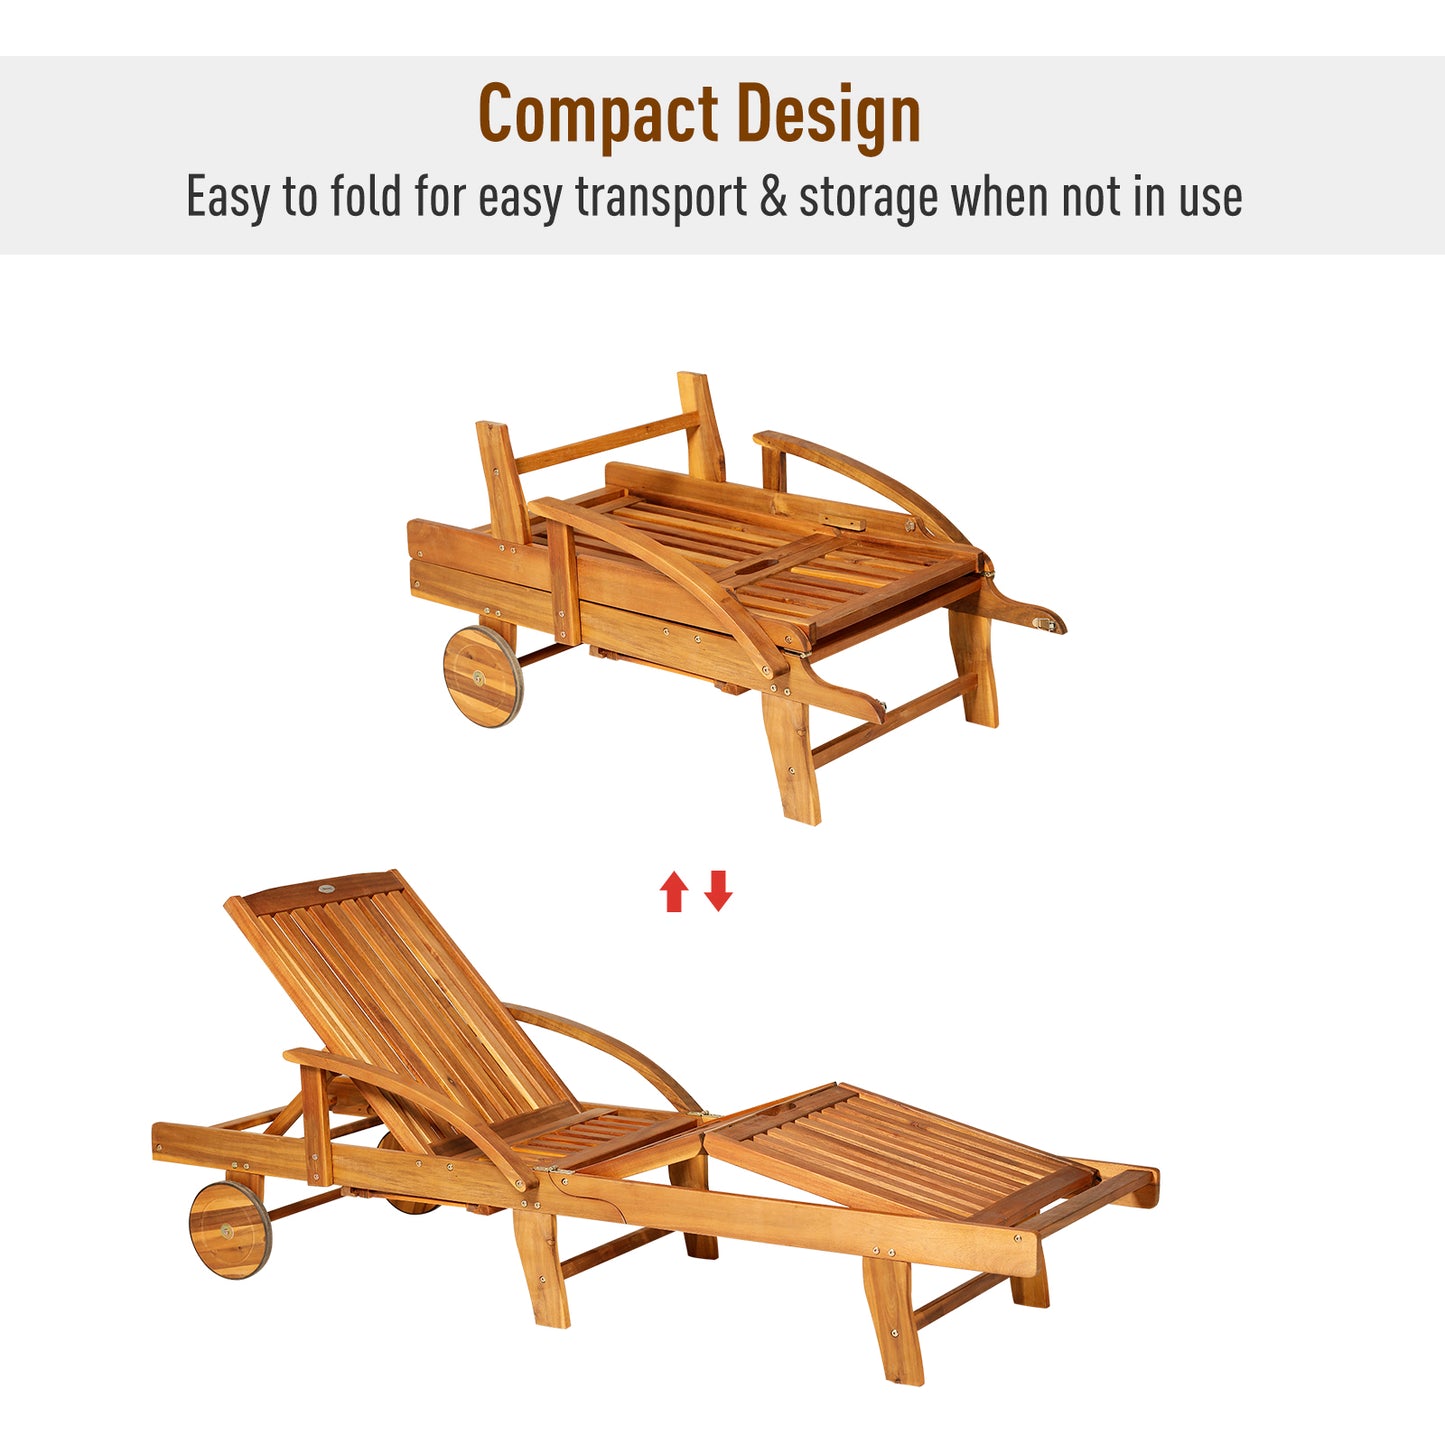 Outsunny Outdoor Garden Patio Wooden Sun Lounger Foldable Recliner Deck Chair Day Bed Furniture with Wheels